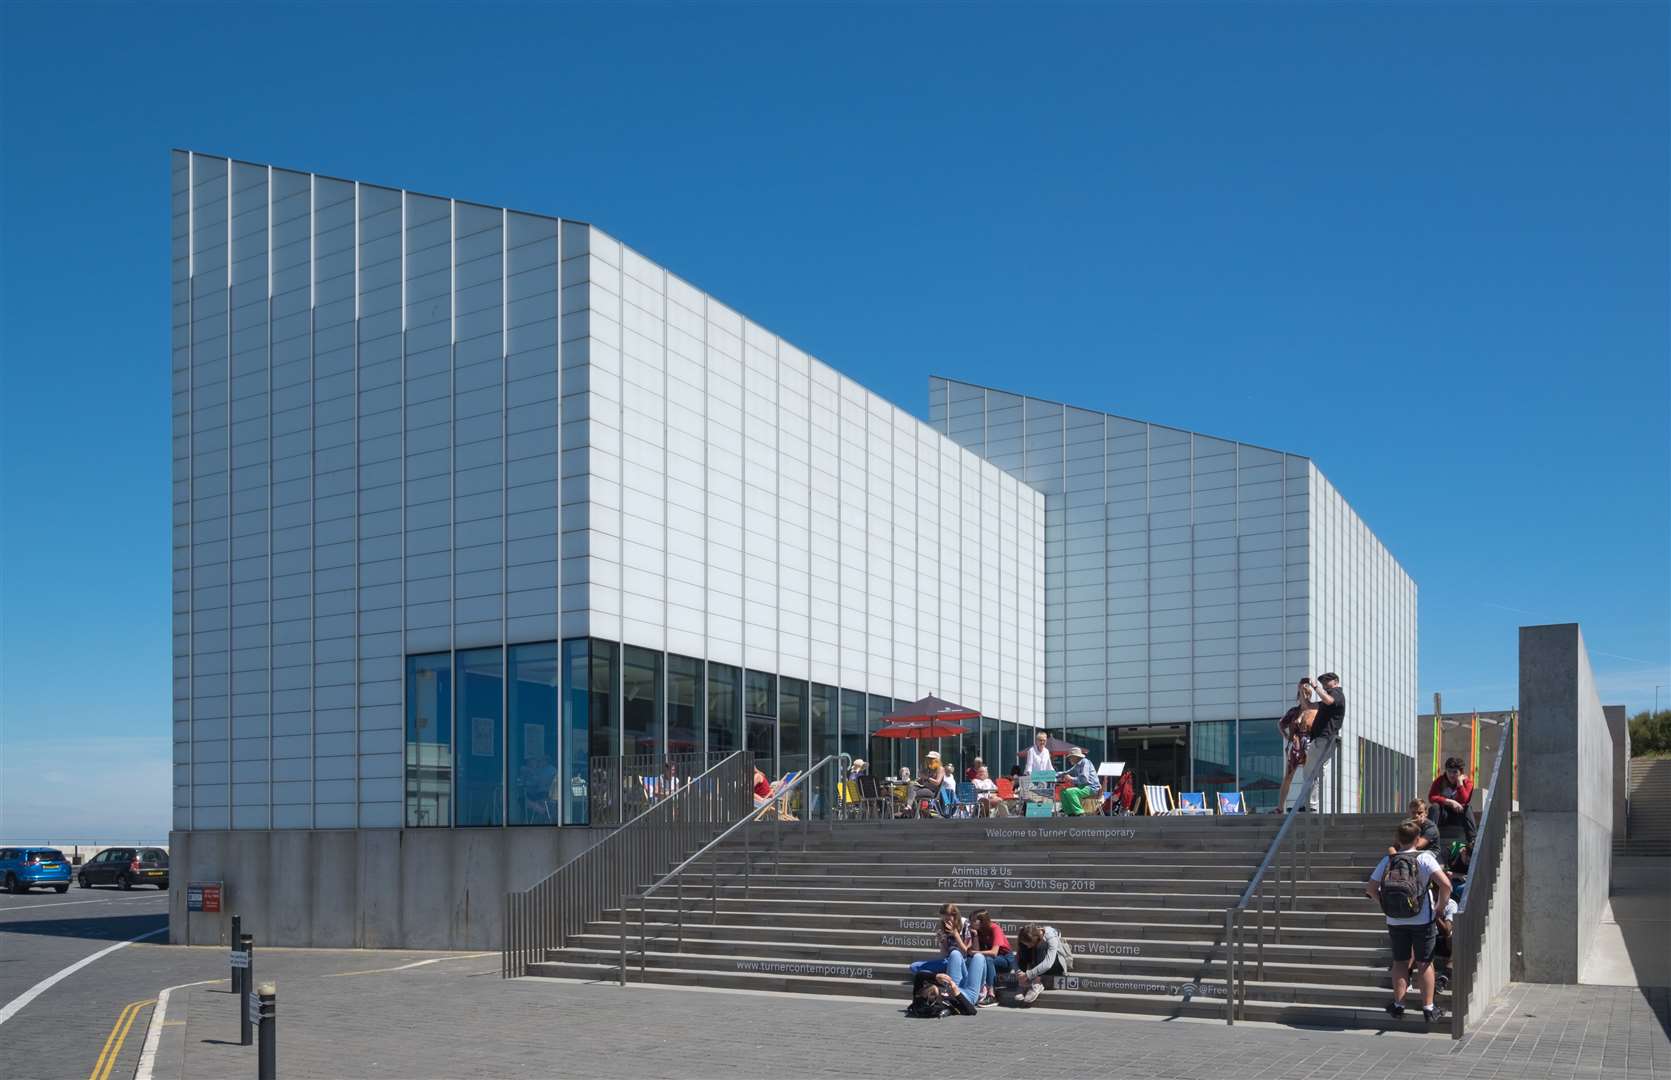 The firm built Margate's Turner Contemporary